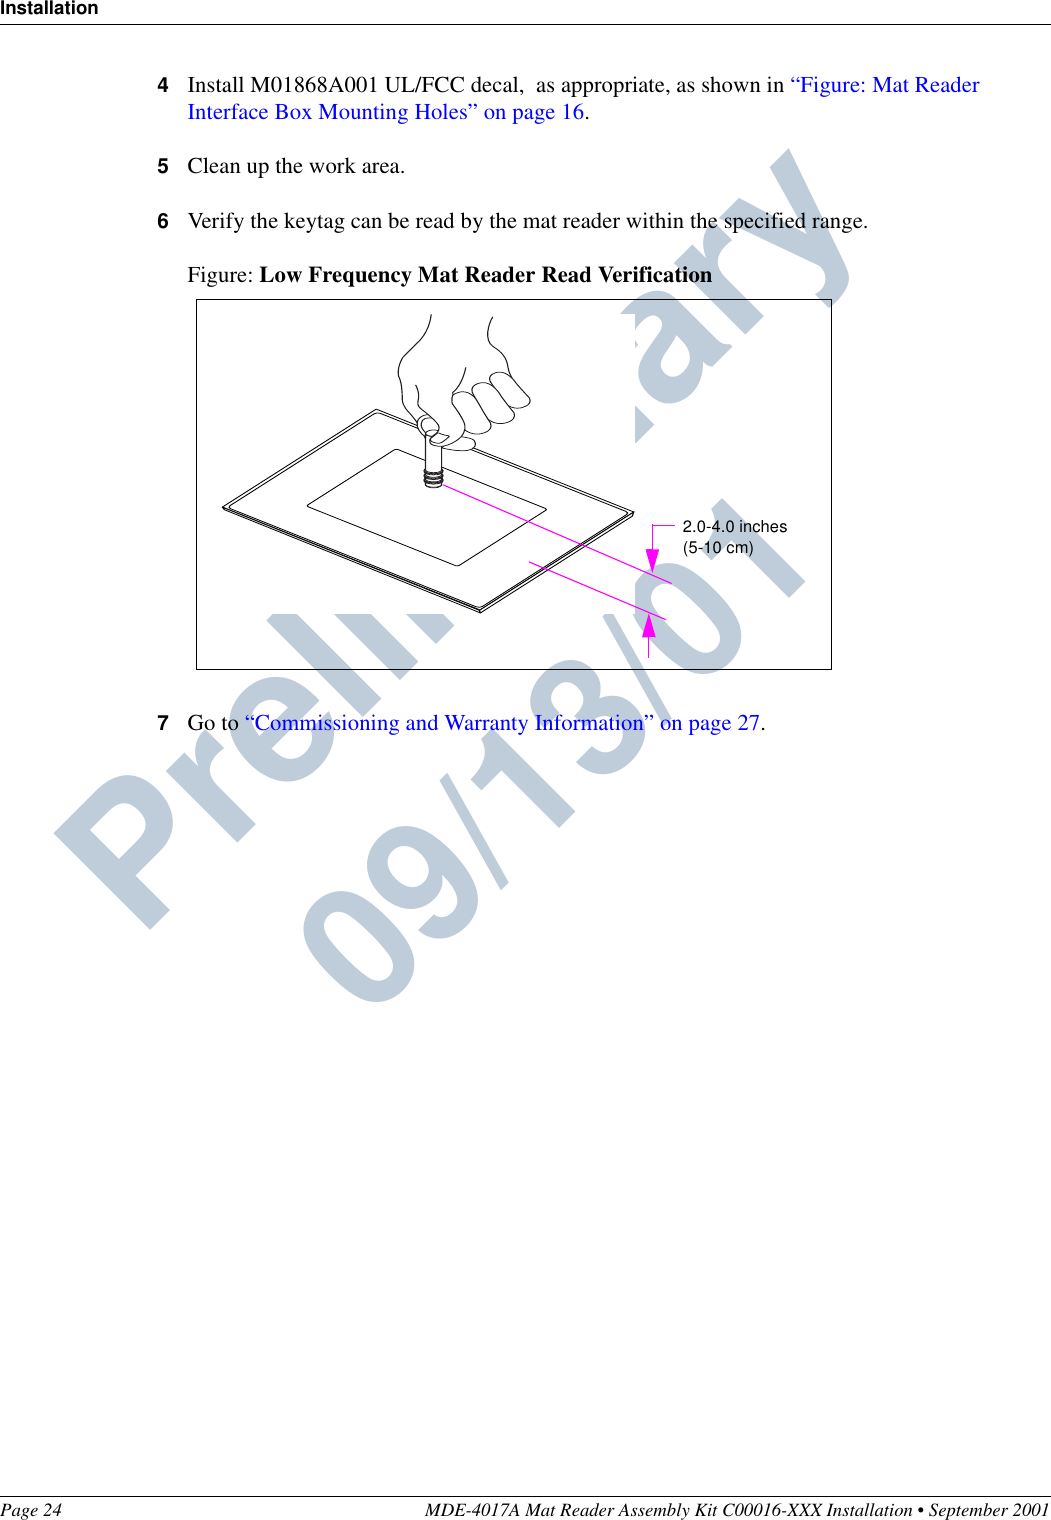 InstallationPage 24 MDE-4017A Mat Reader Assembly Kit C00016-XXX Installation • September 2001Preliminary  09/13/014Install M01868A001 UL/FCC decal,  as appropriate, as shown in “Figure: Mat Reader Interface Box Mounting Holes” on page 16.5Clean up the work area.6Verify the keytag can be read by the mat reader within the specified range.Figure: Low Frequency Mat Reader Read Verification7Go to “Commissioning and Warranty Information” on page 27.2.0-4.0 inches(5-10 cm)